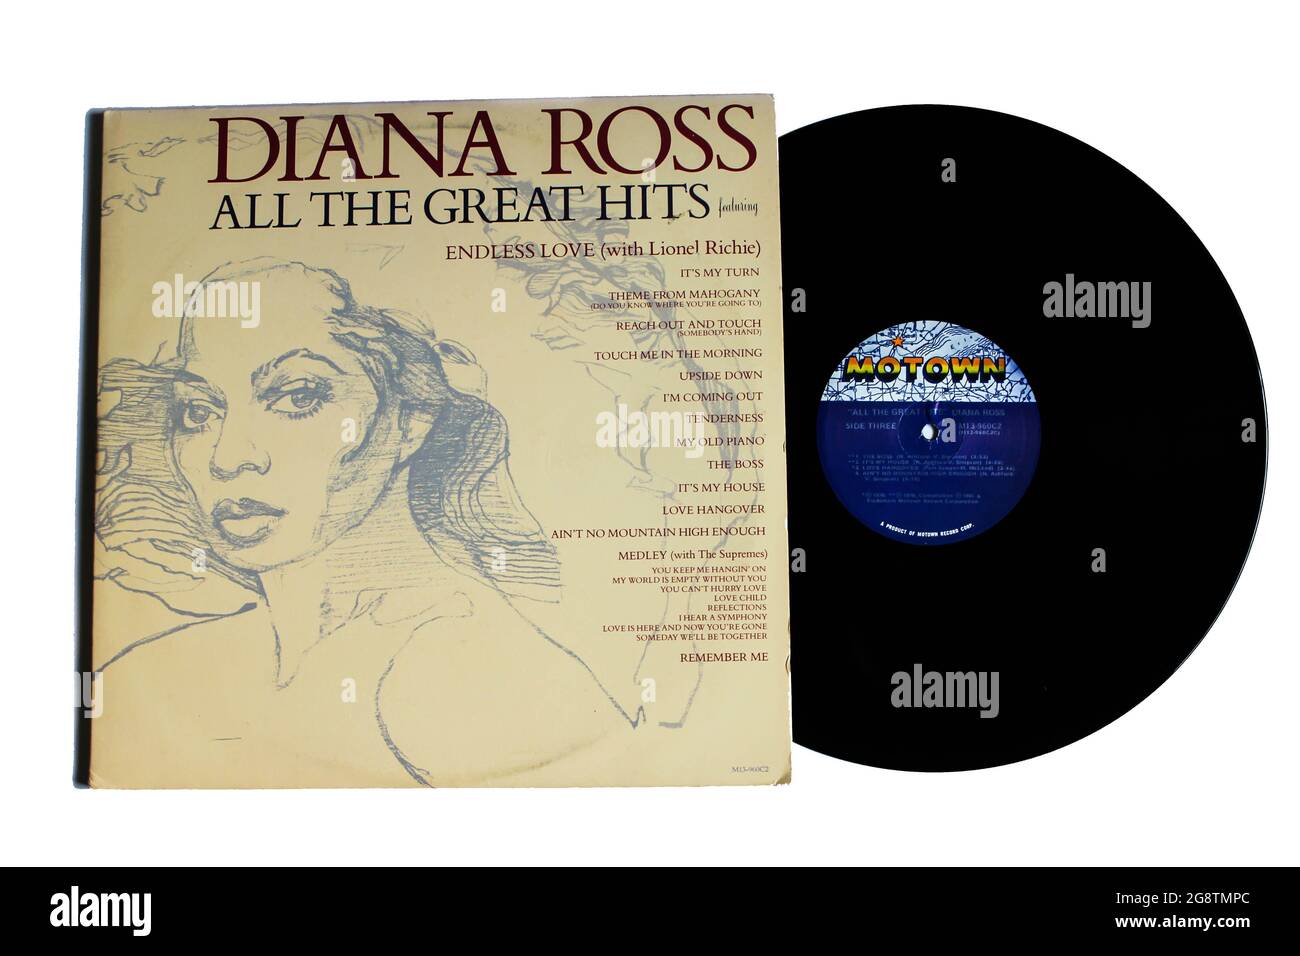 R&B Soul artist, Diana Ross music album on vinyl record LP Motown disc. Titled: All the Great Hits album cover Stock Photo